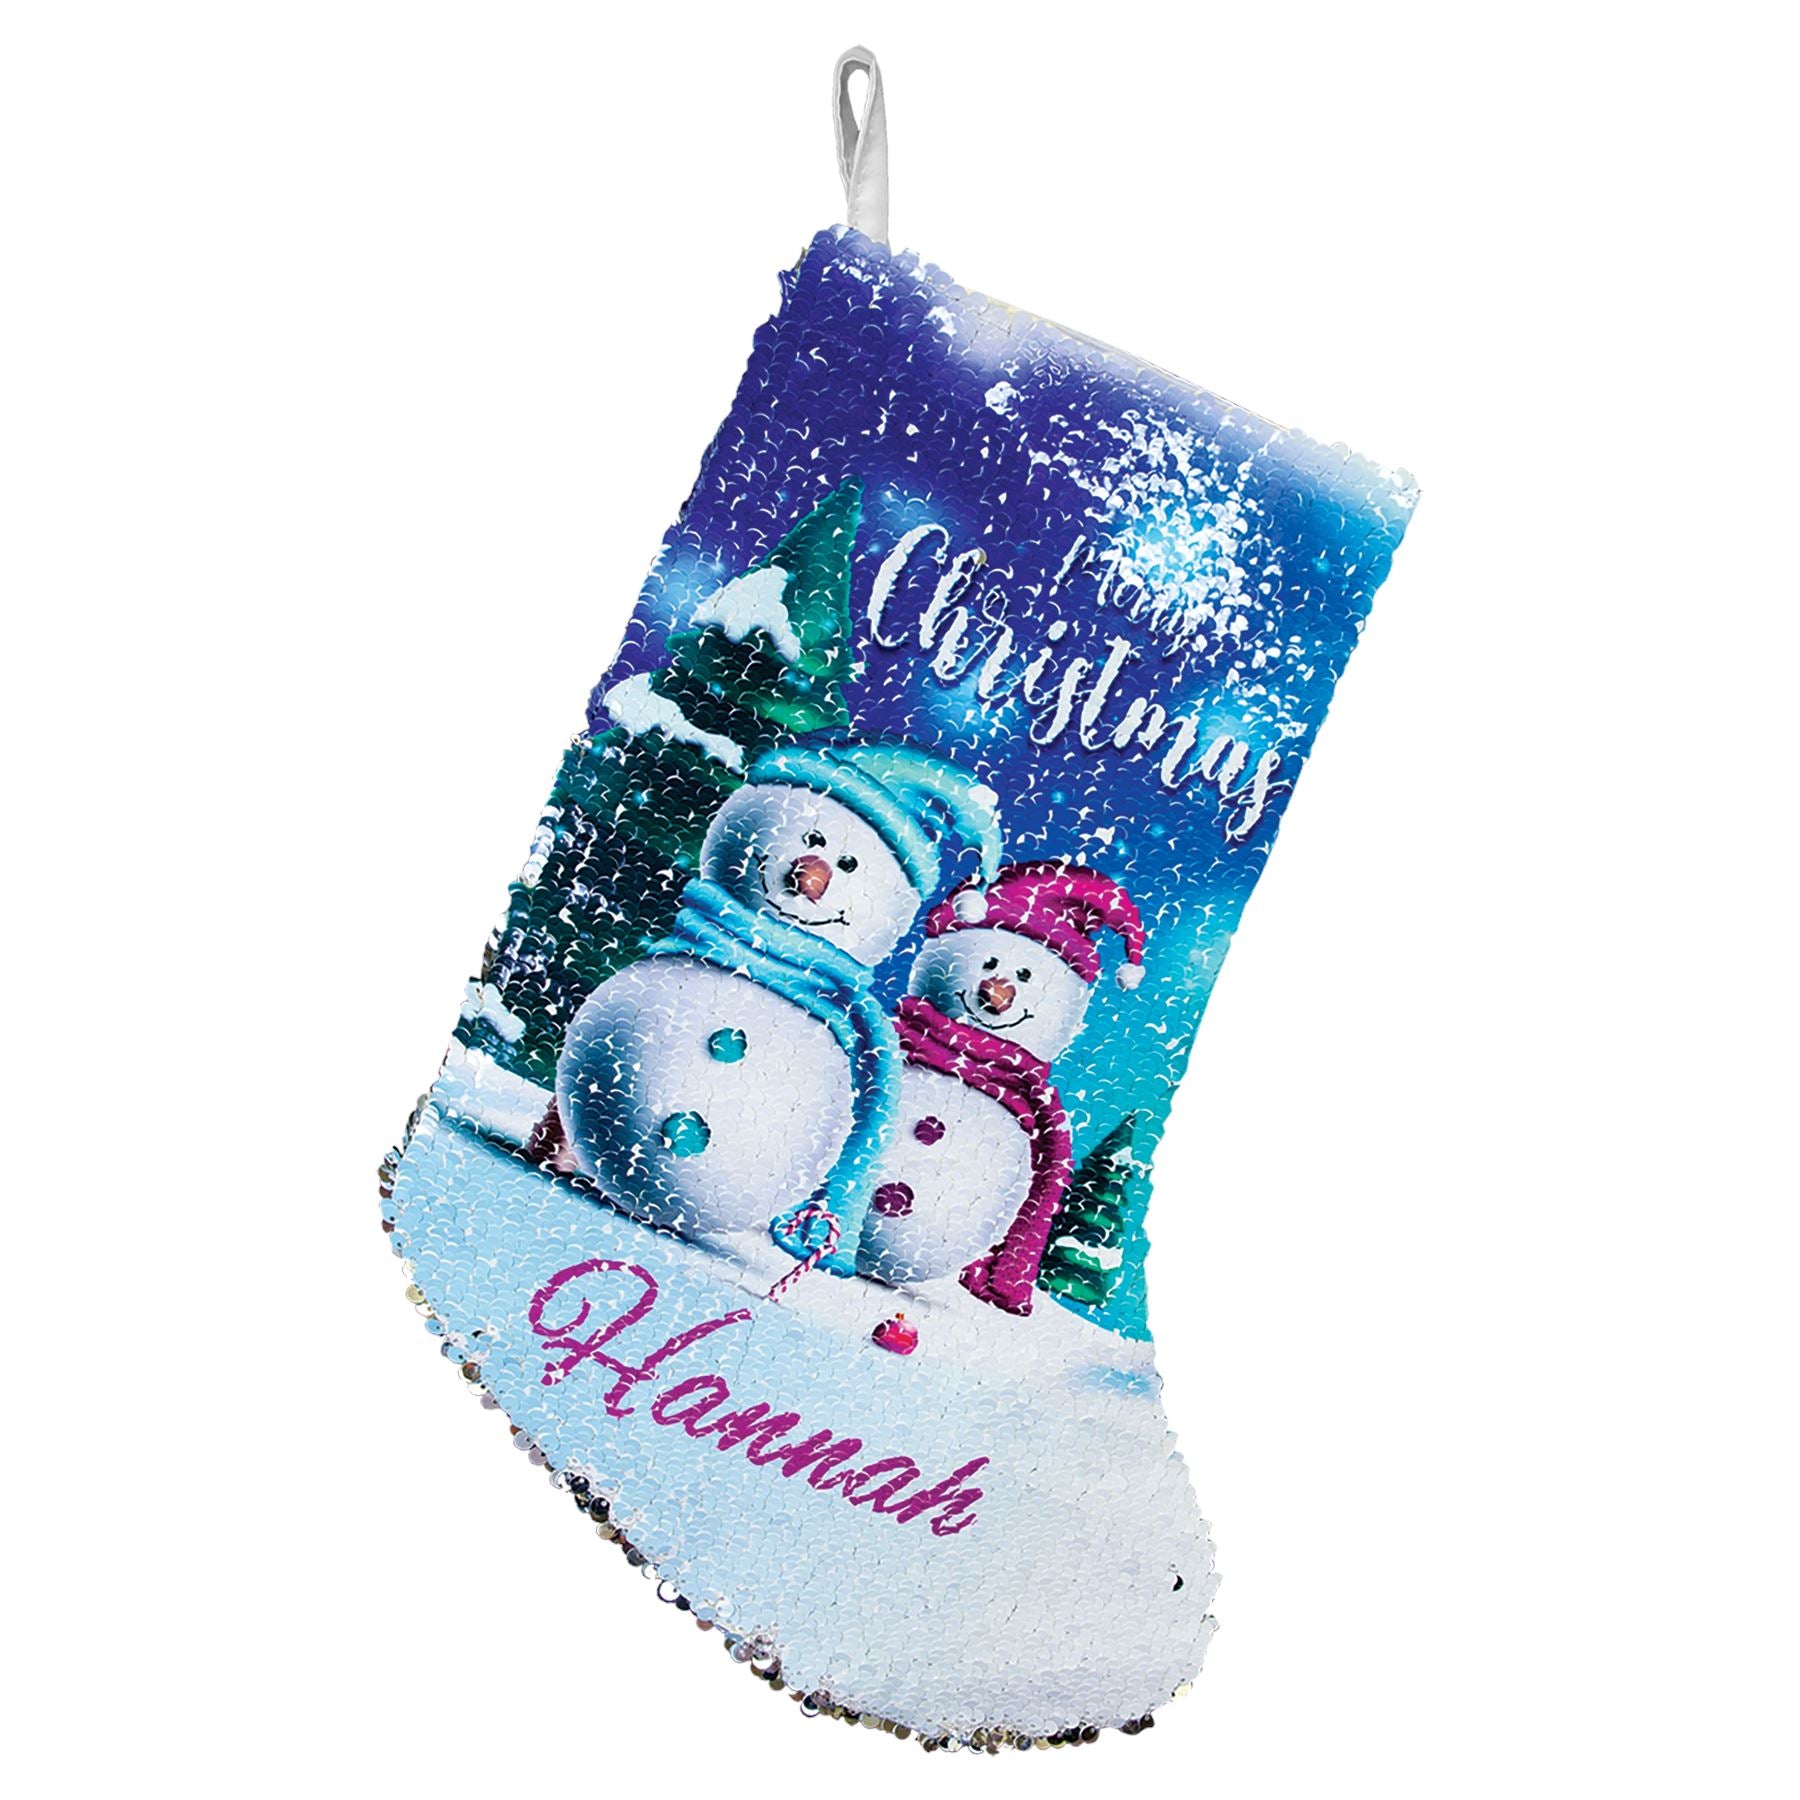 Reversible Sequin Christmas Stocking, 10" x 14", Full Color Sub Dye Ornaments Craftworks NW 